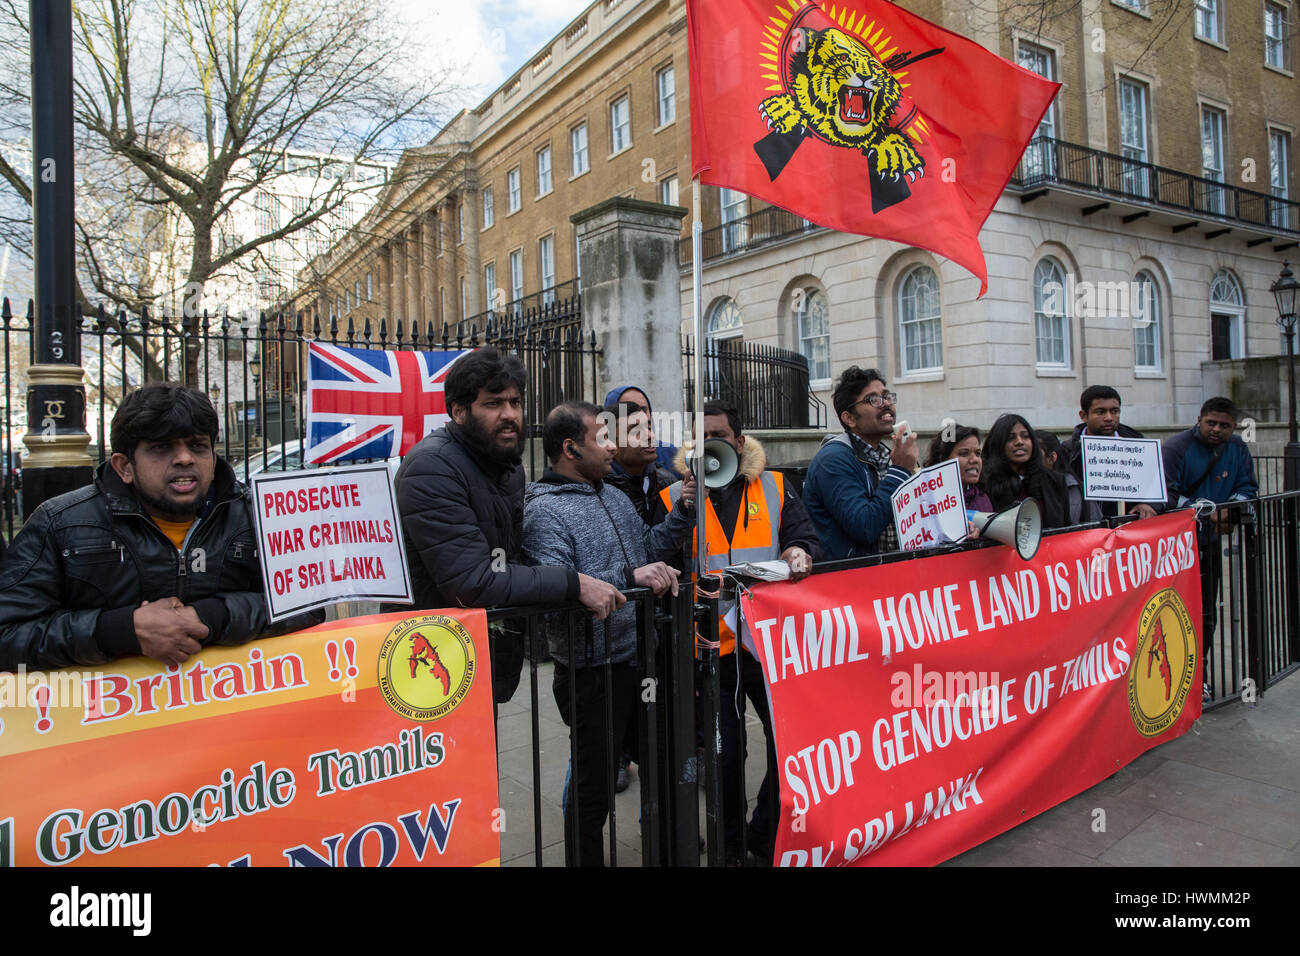 London, UK. 21st March, 2017. British Tamils protest outside Downing Street against genocide against the Tamil people in Sri Lanka. Stock Photo